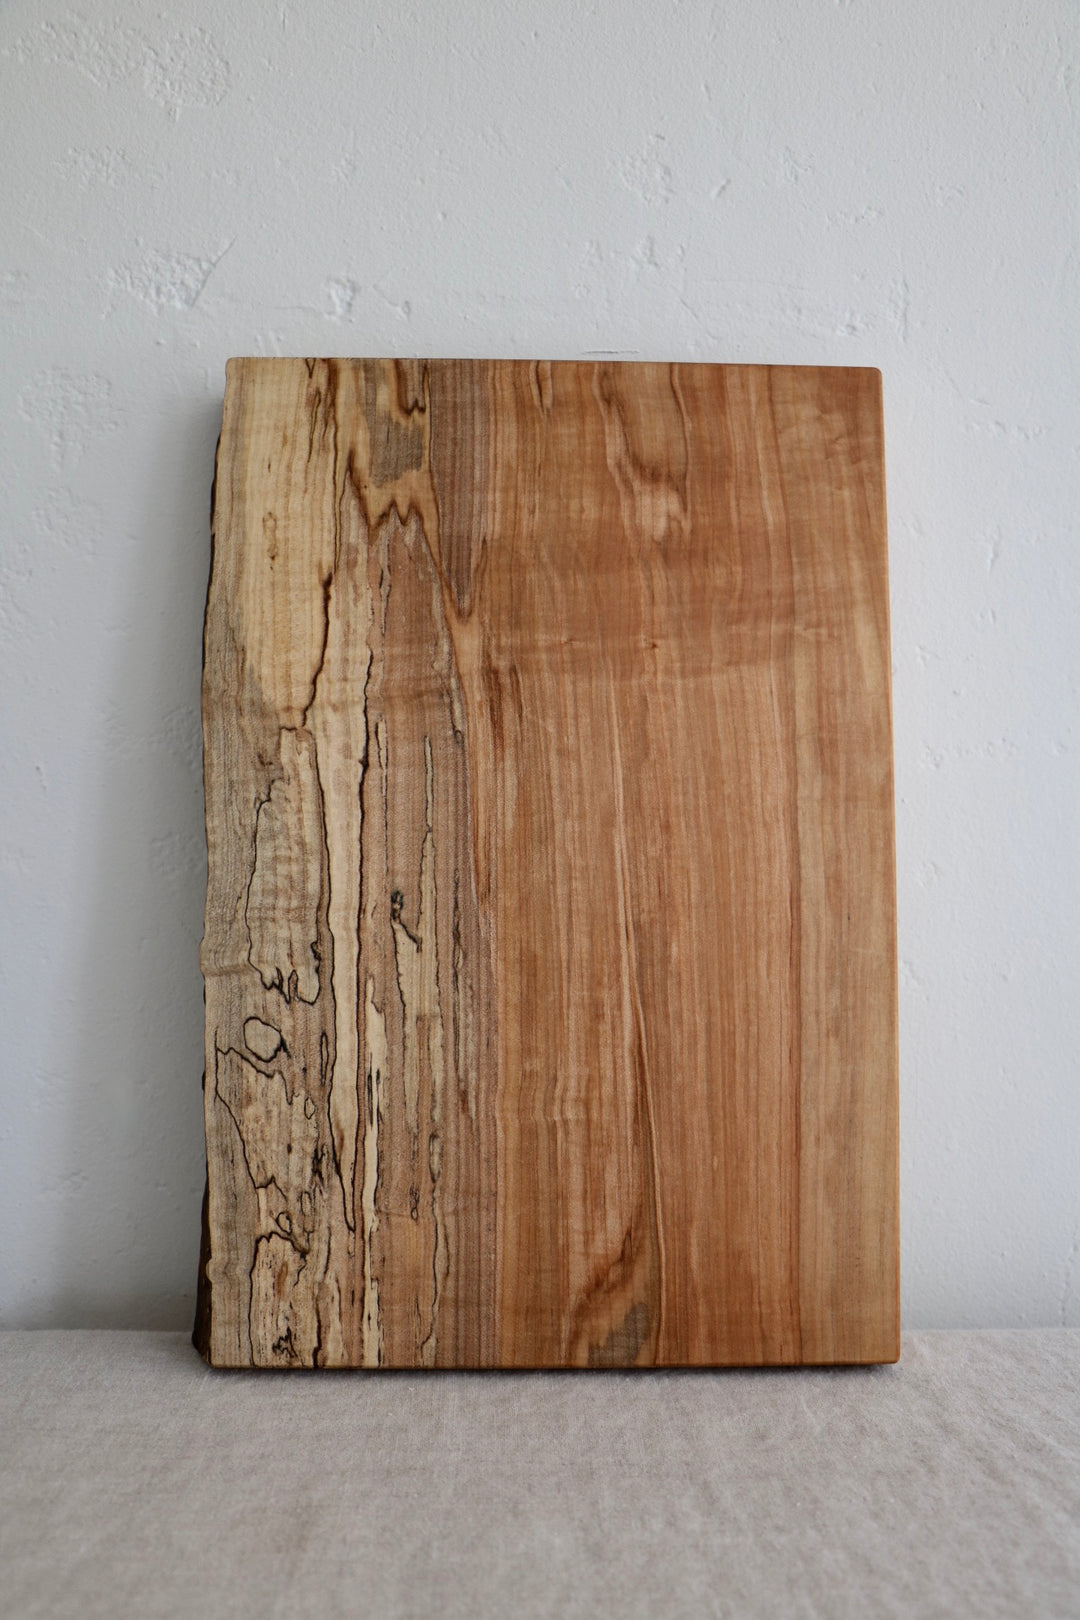 DOMAIN Custom Cutting Board crafted with Fallen Lumber